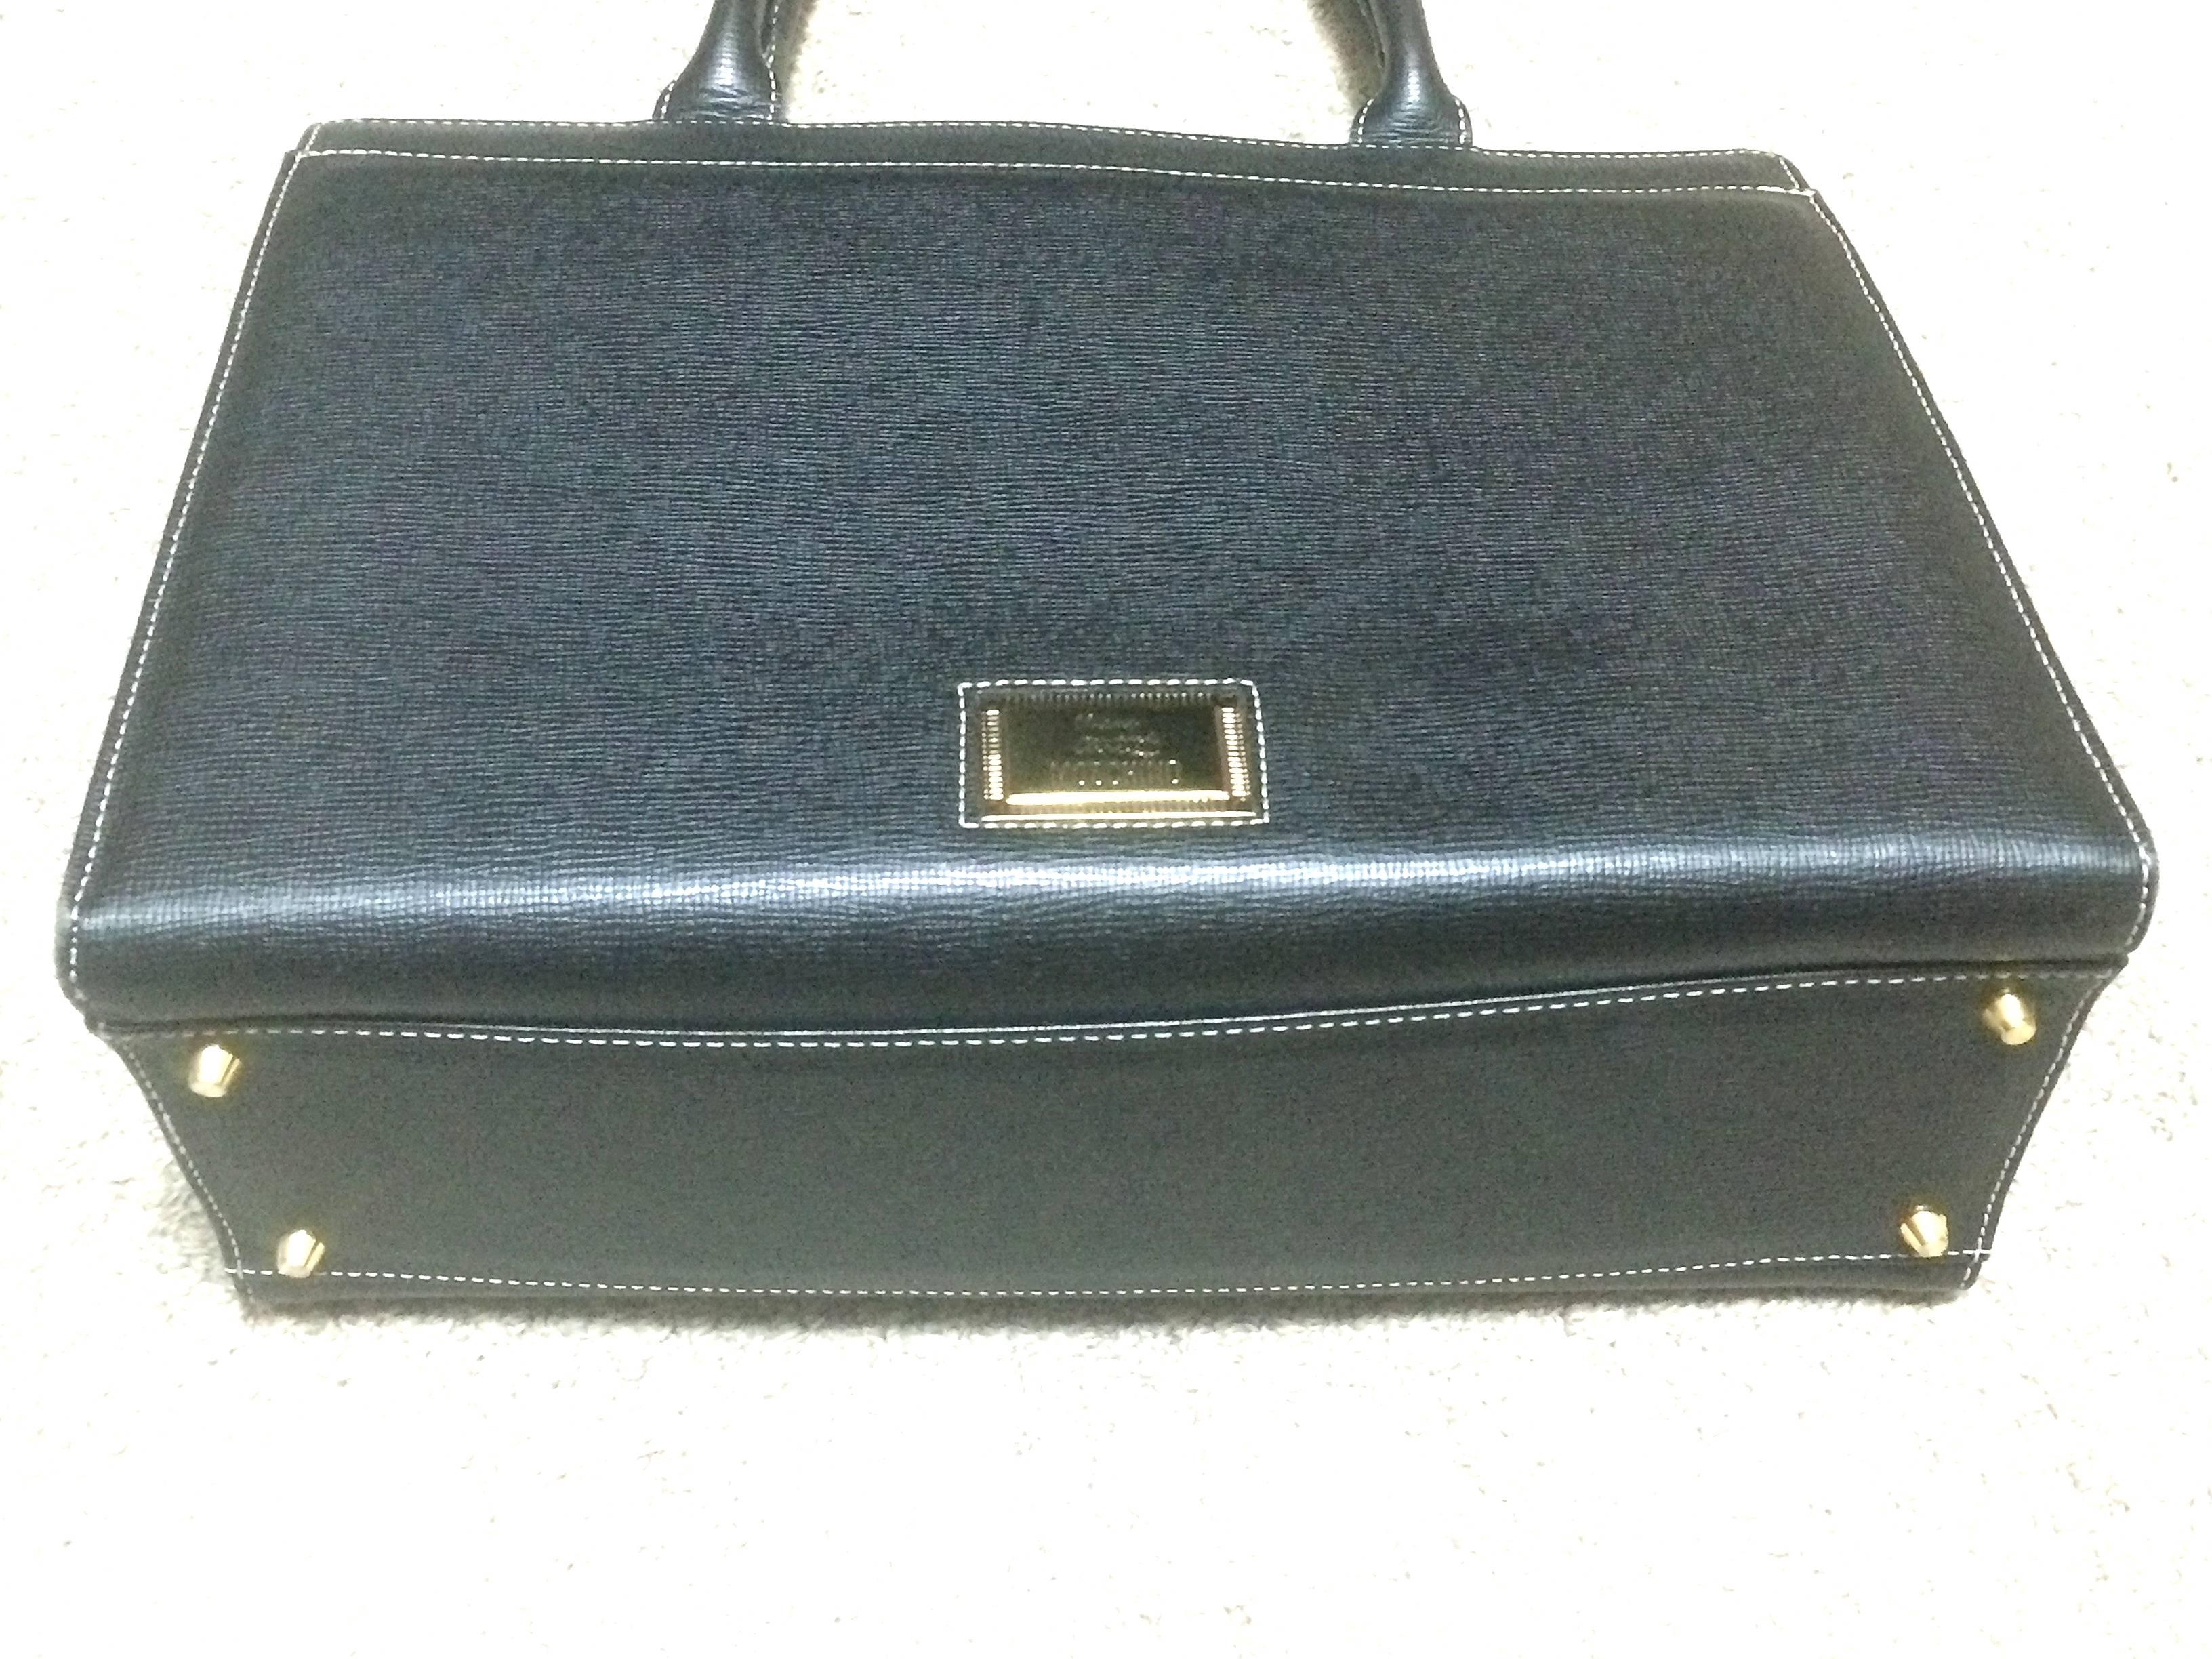 Vintage MOSCHINO black leather tote bag in Kelly purse style with iconic M charm For Sale 3